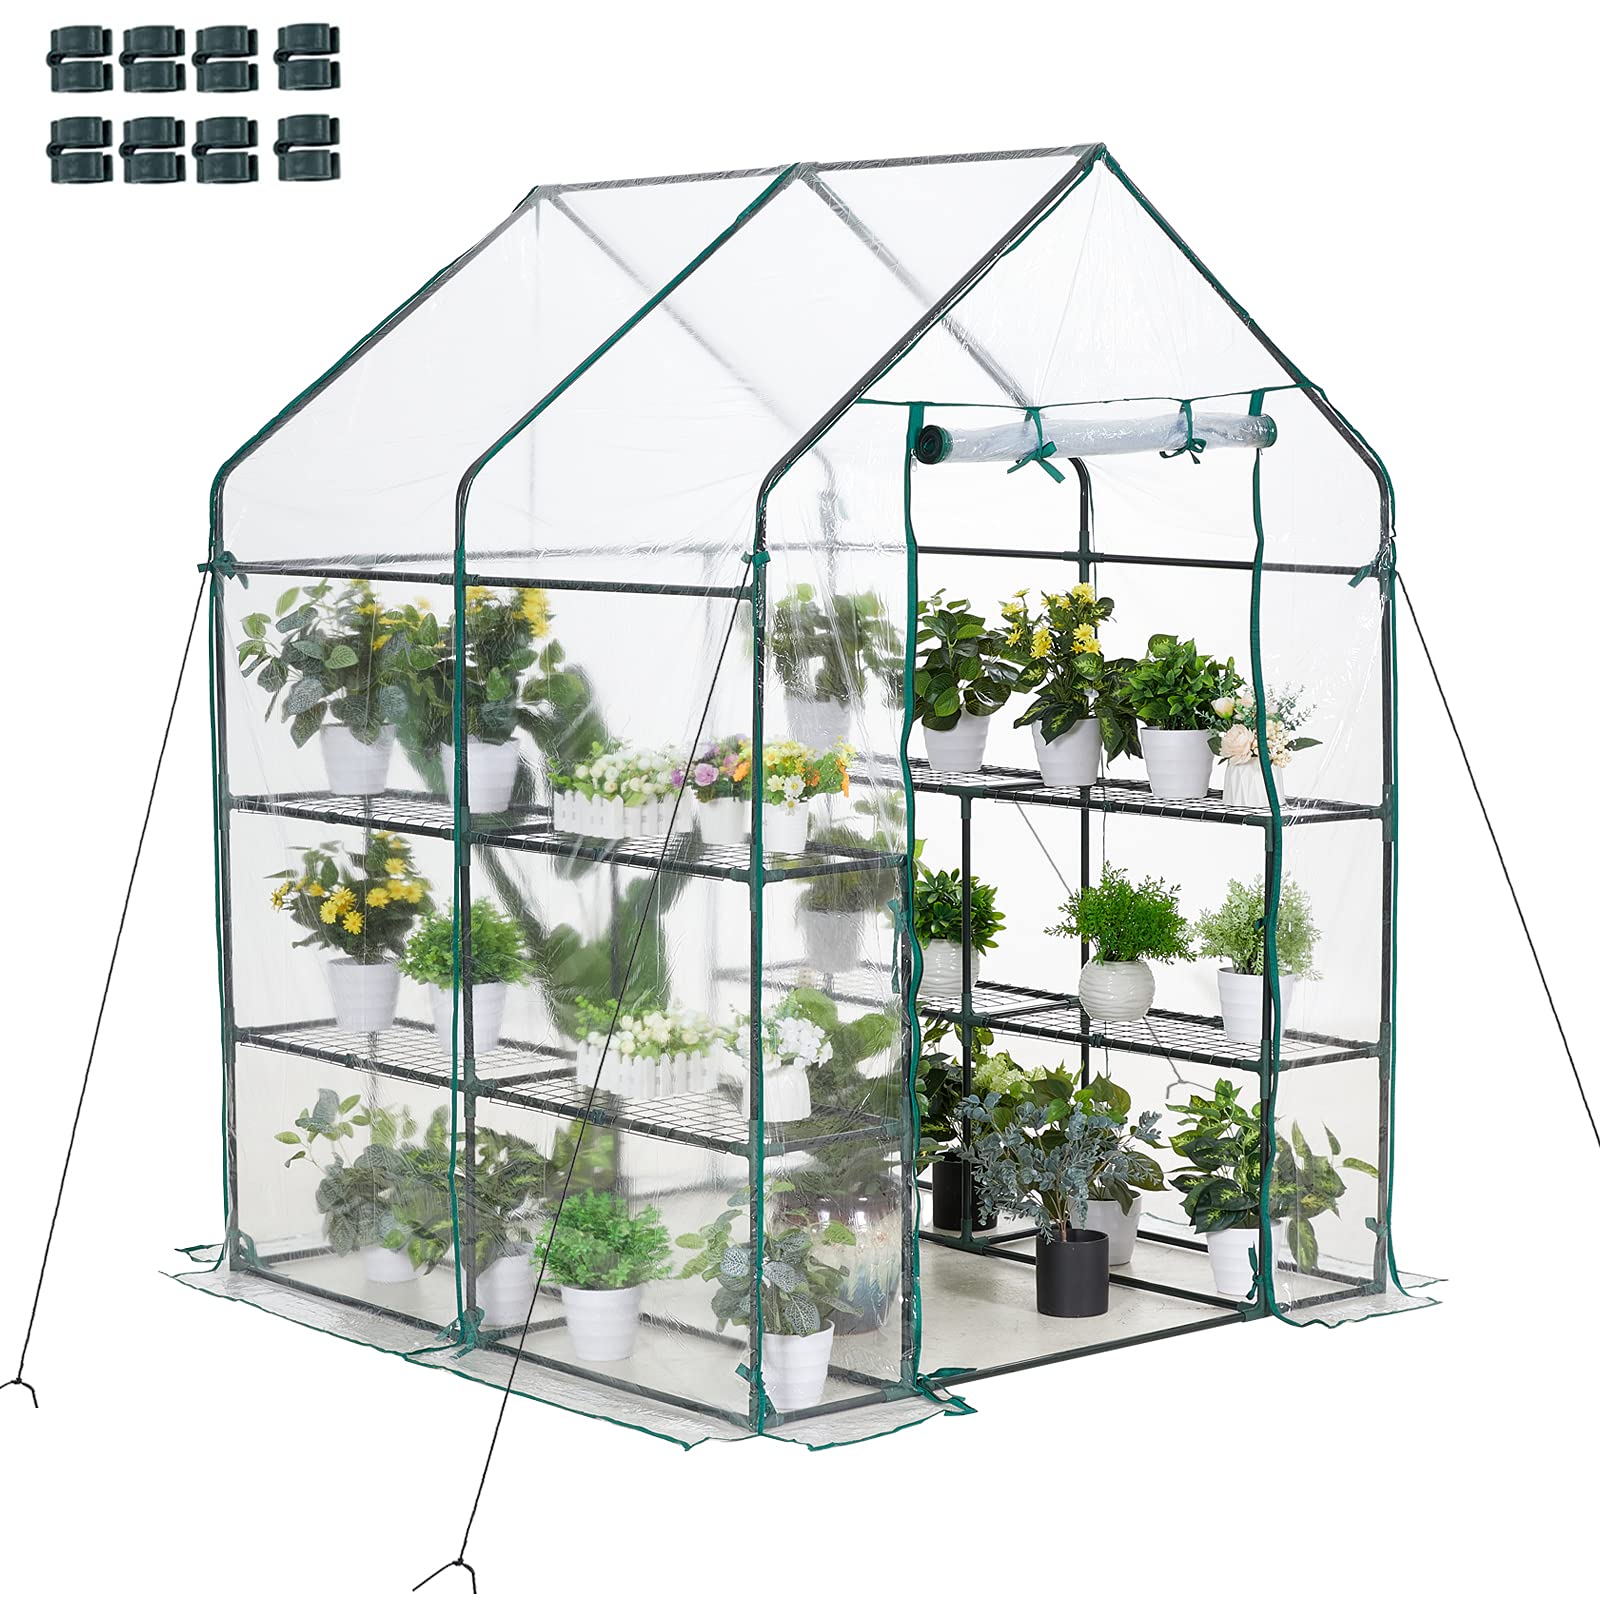 AMERLIFE Mini Walk-in Greenhouse 3 Tier 4 Shelves with PVC Cover and Roll-Up Zipper Door,for Indoor Outdoor Use Extra Hooks Wind Ropes, 77''x56''x29''